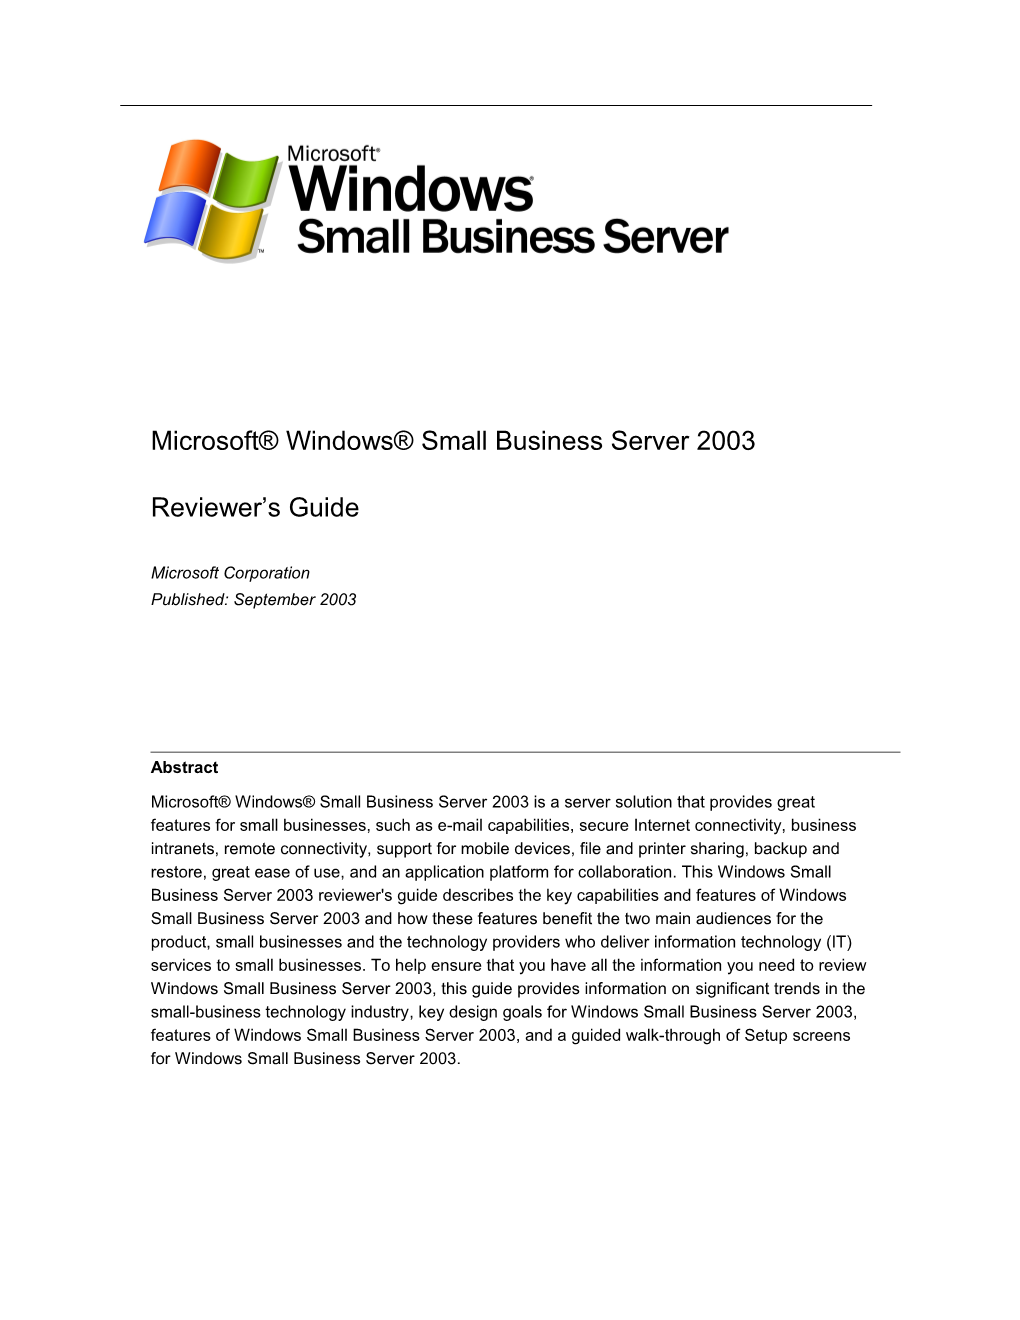 Microsoft Windows Small Business Server 2003 Reviewer's Guide